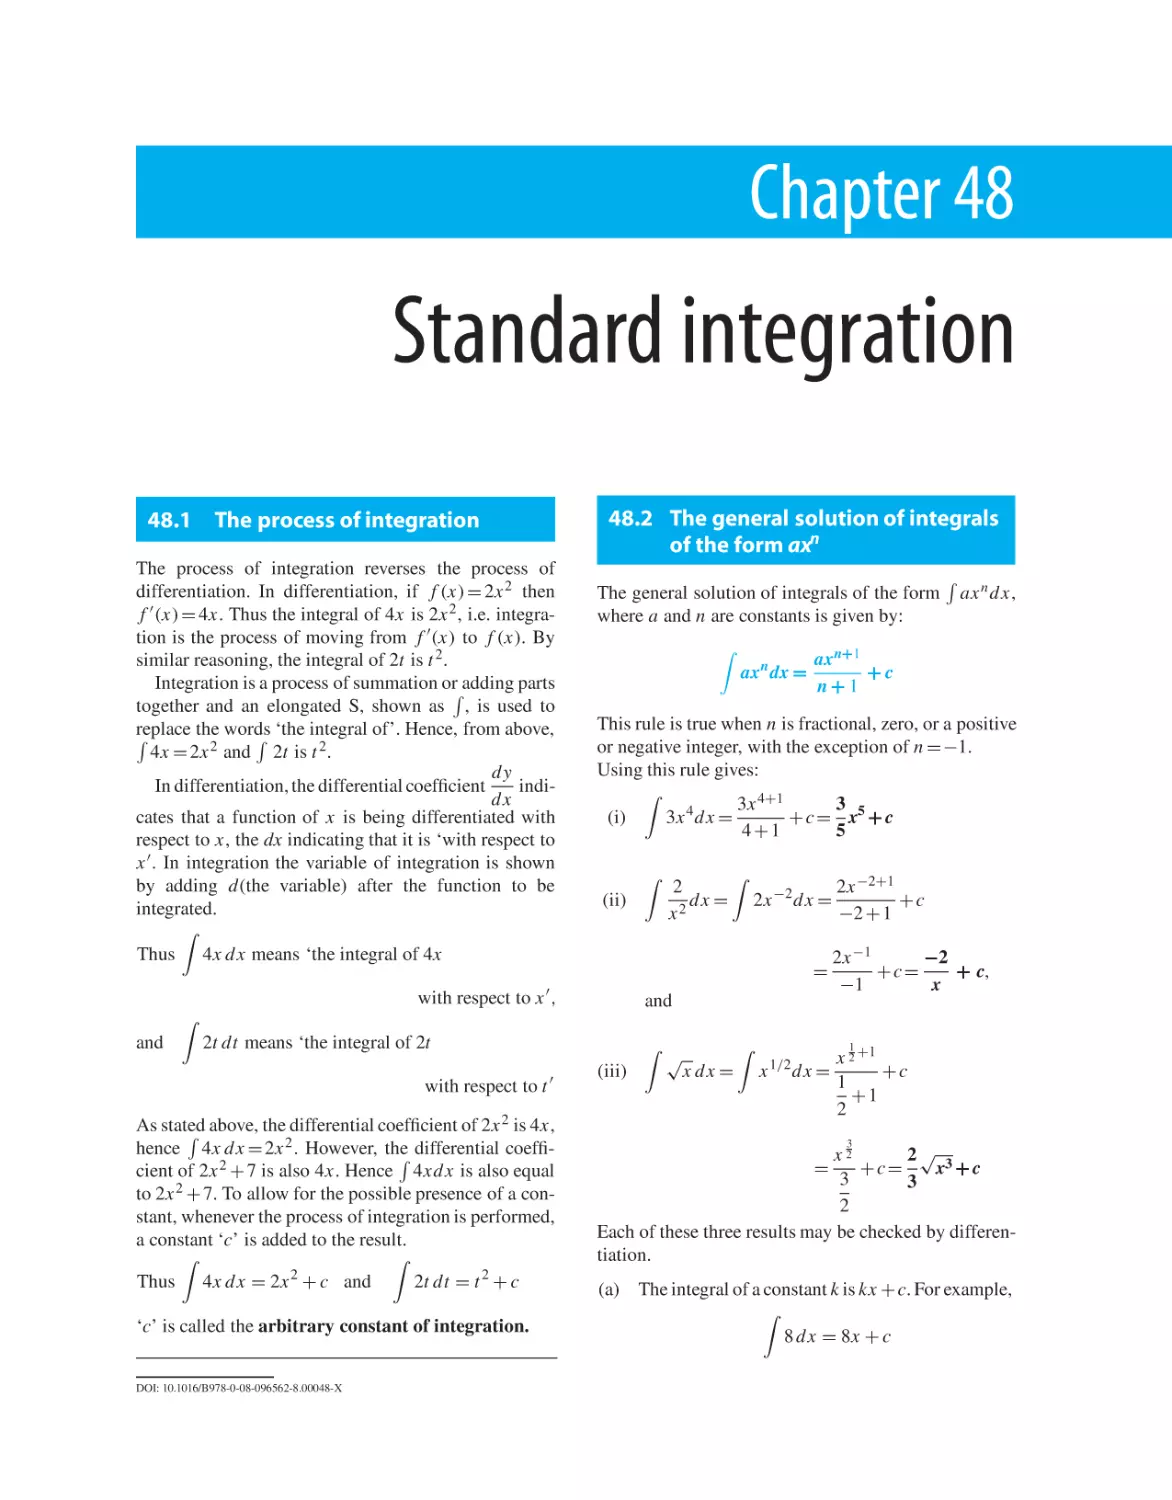 Chapter 48. Standard integration
48.1 The process of integration
48.2 The general solution of integrals of the form axn